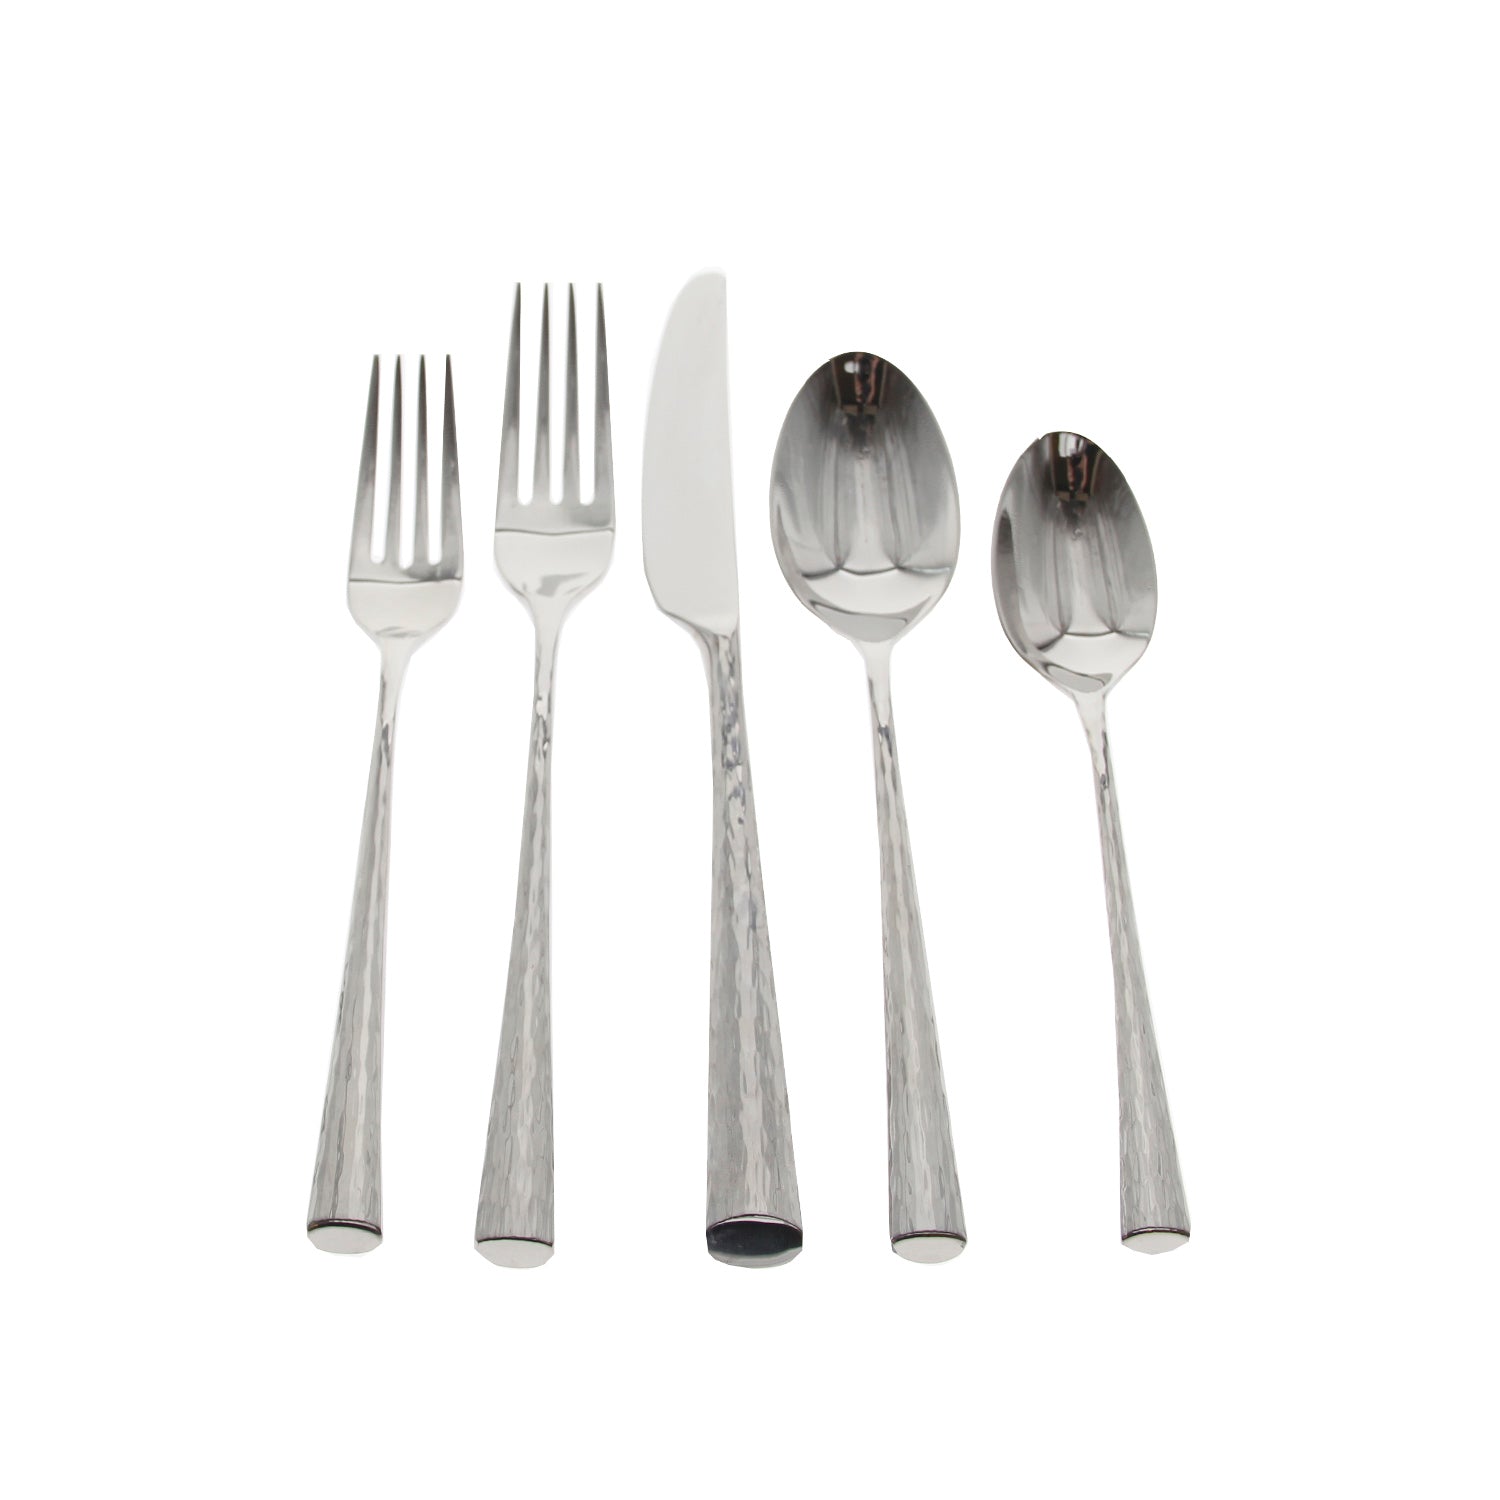 SET OF 5 SILVER CUTLERY